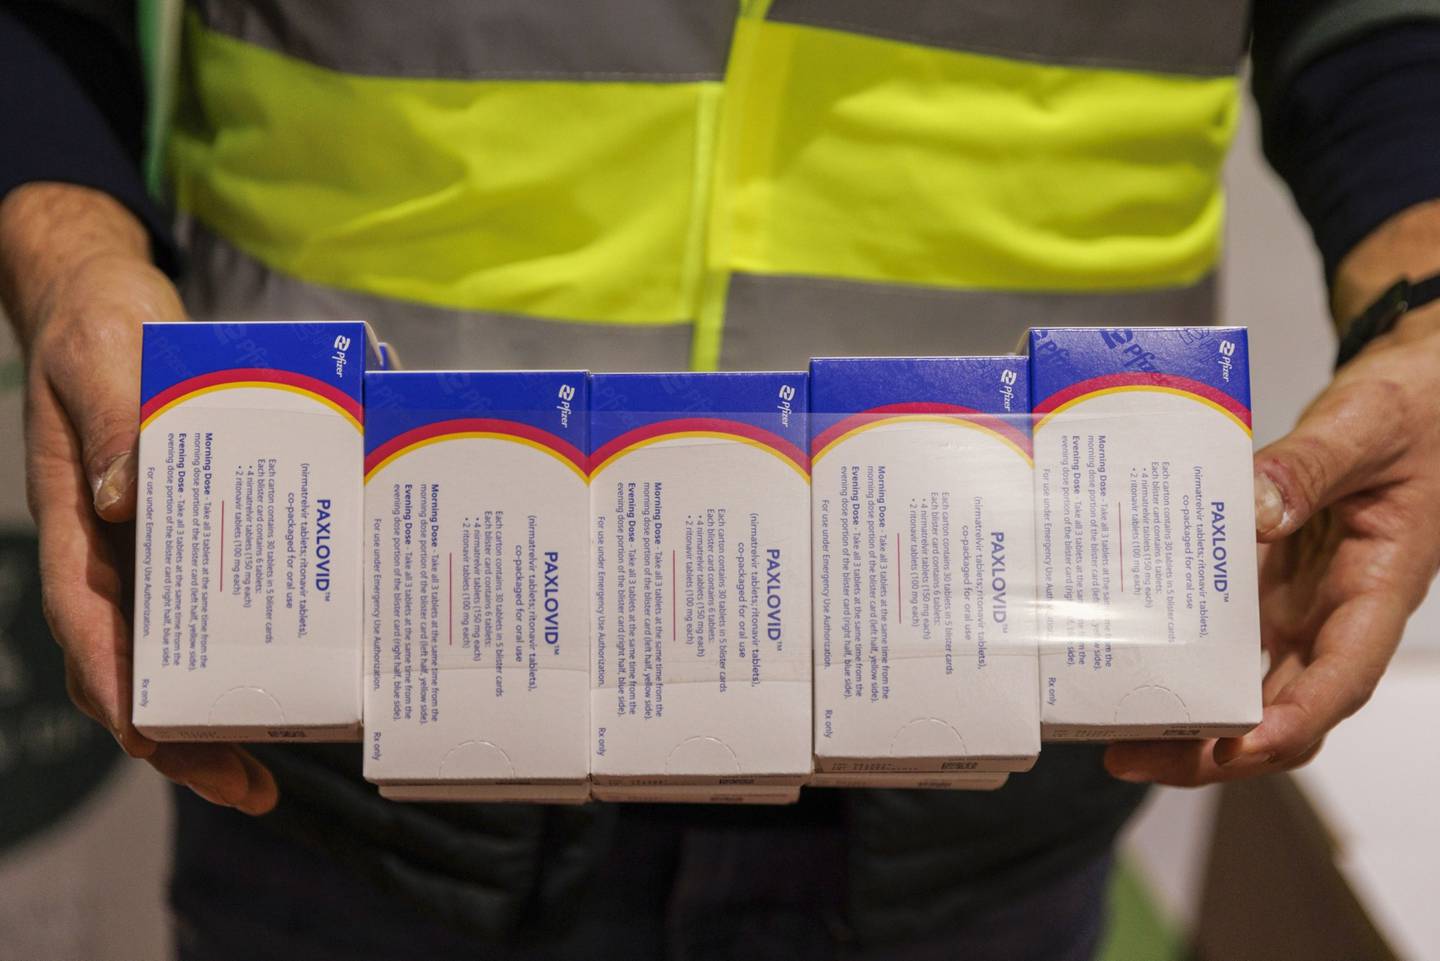 A worker unpacks boxes of Pfizer Inc.s Paxlovid antiviral medication in a warehouse in Shoham, Israel.